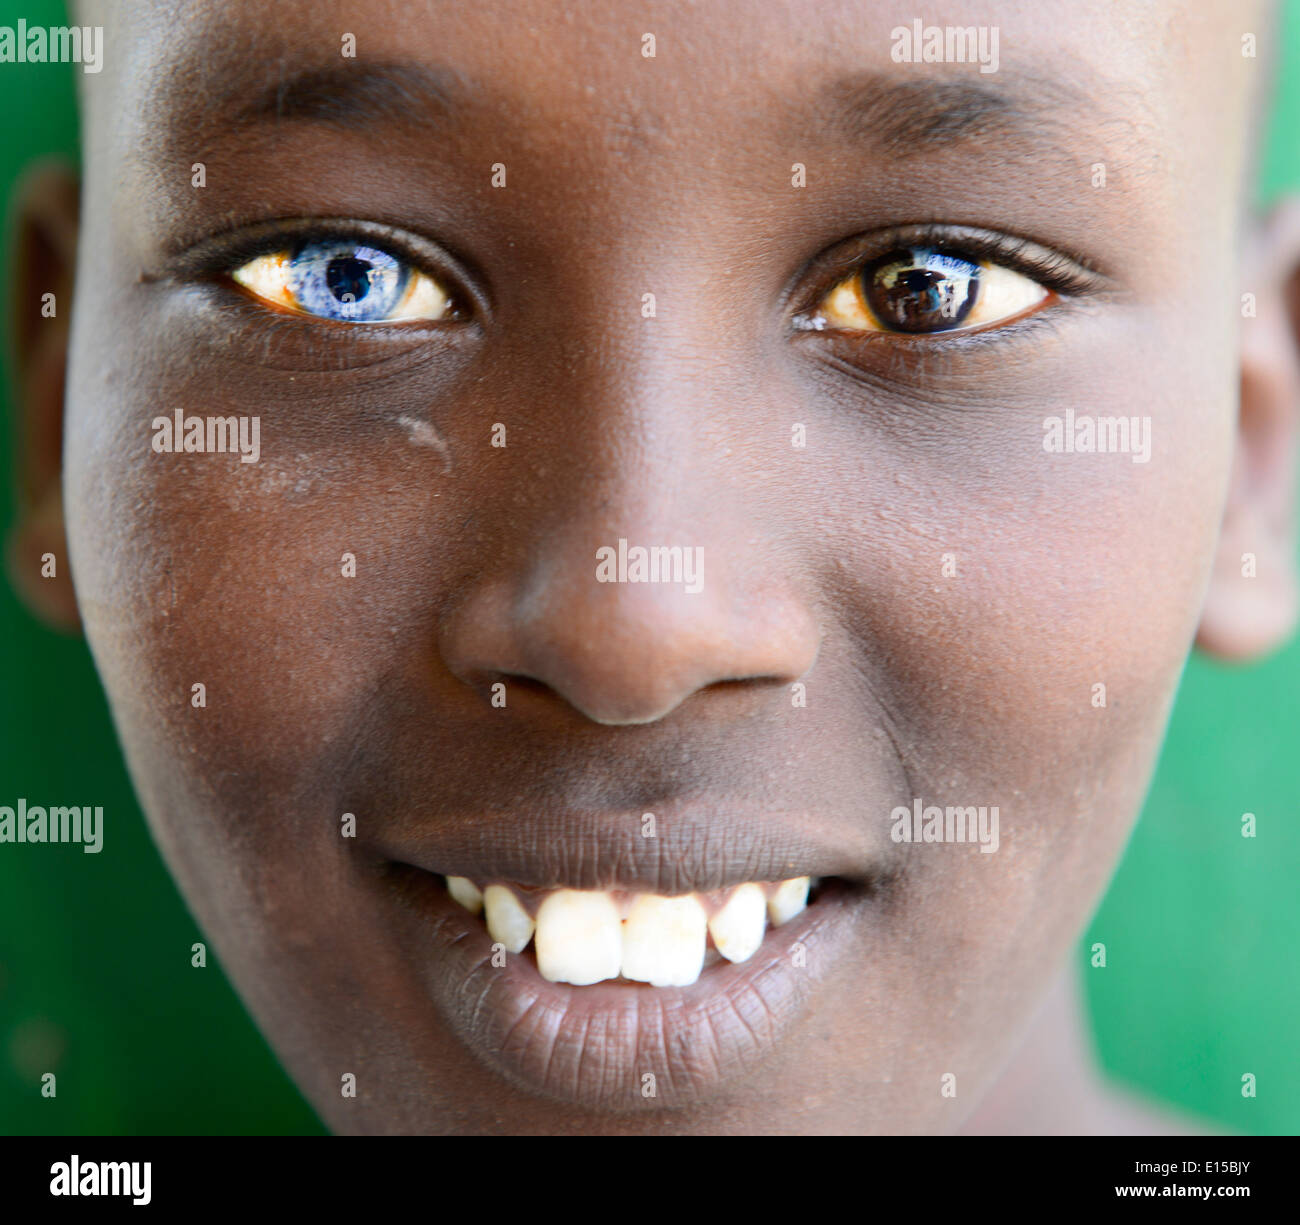 A Kenyan boy that has two different color eyes. this symptom is known as  Heterochromia of the eye. Stock Photo